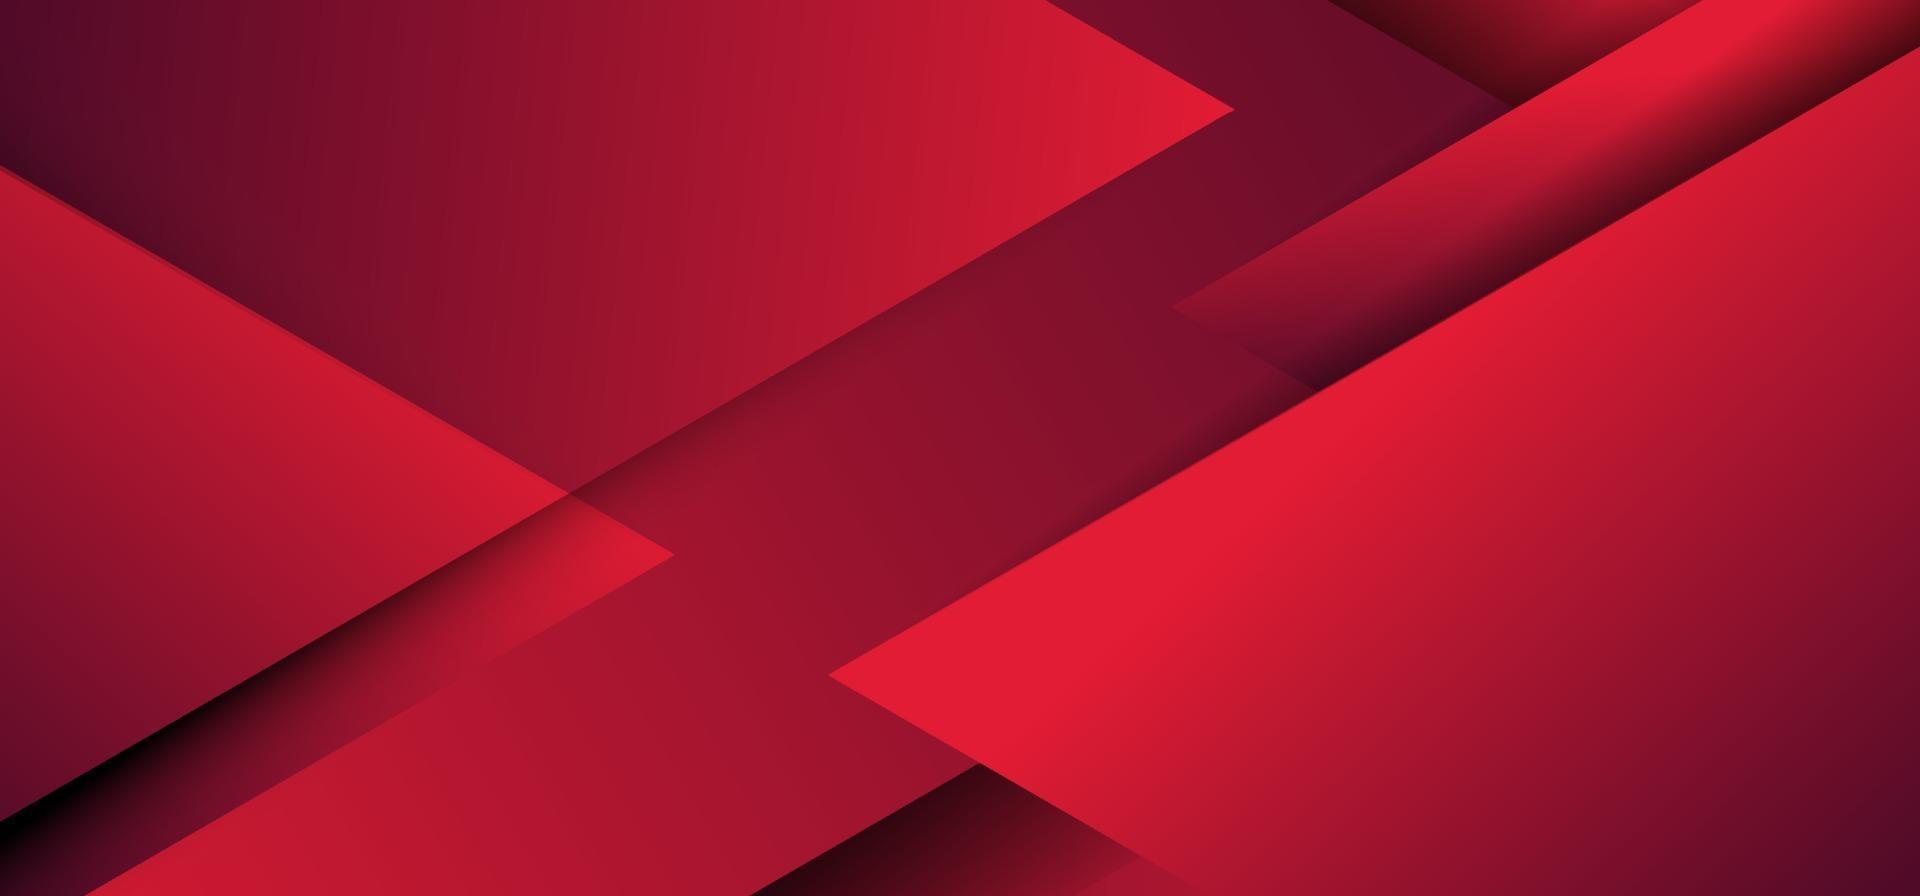 Abstract red geometric triangles overlapping layer paper cut style background. vector